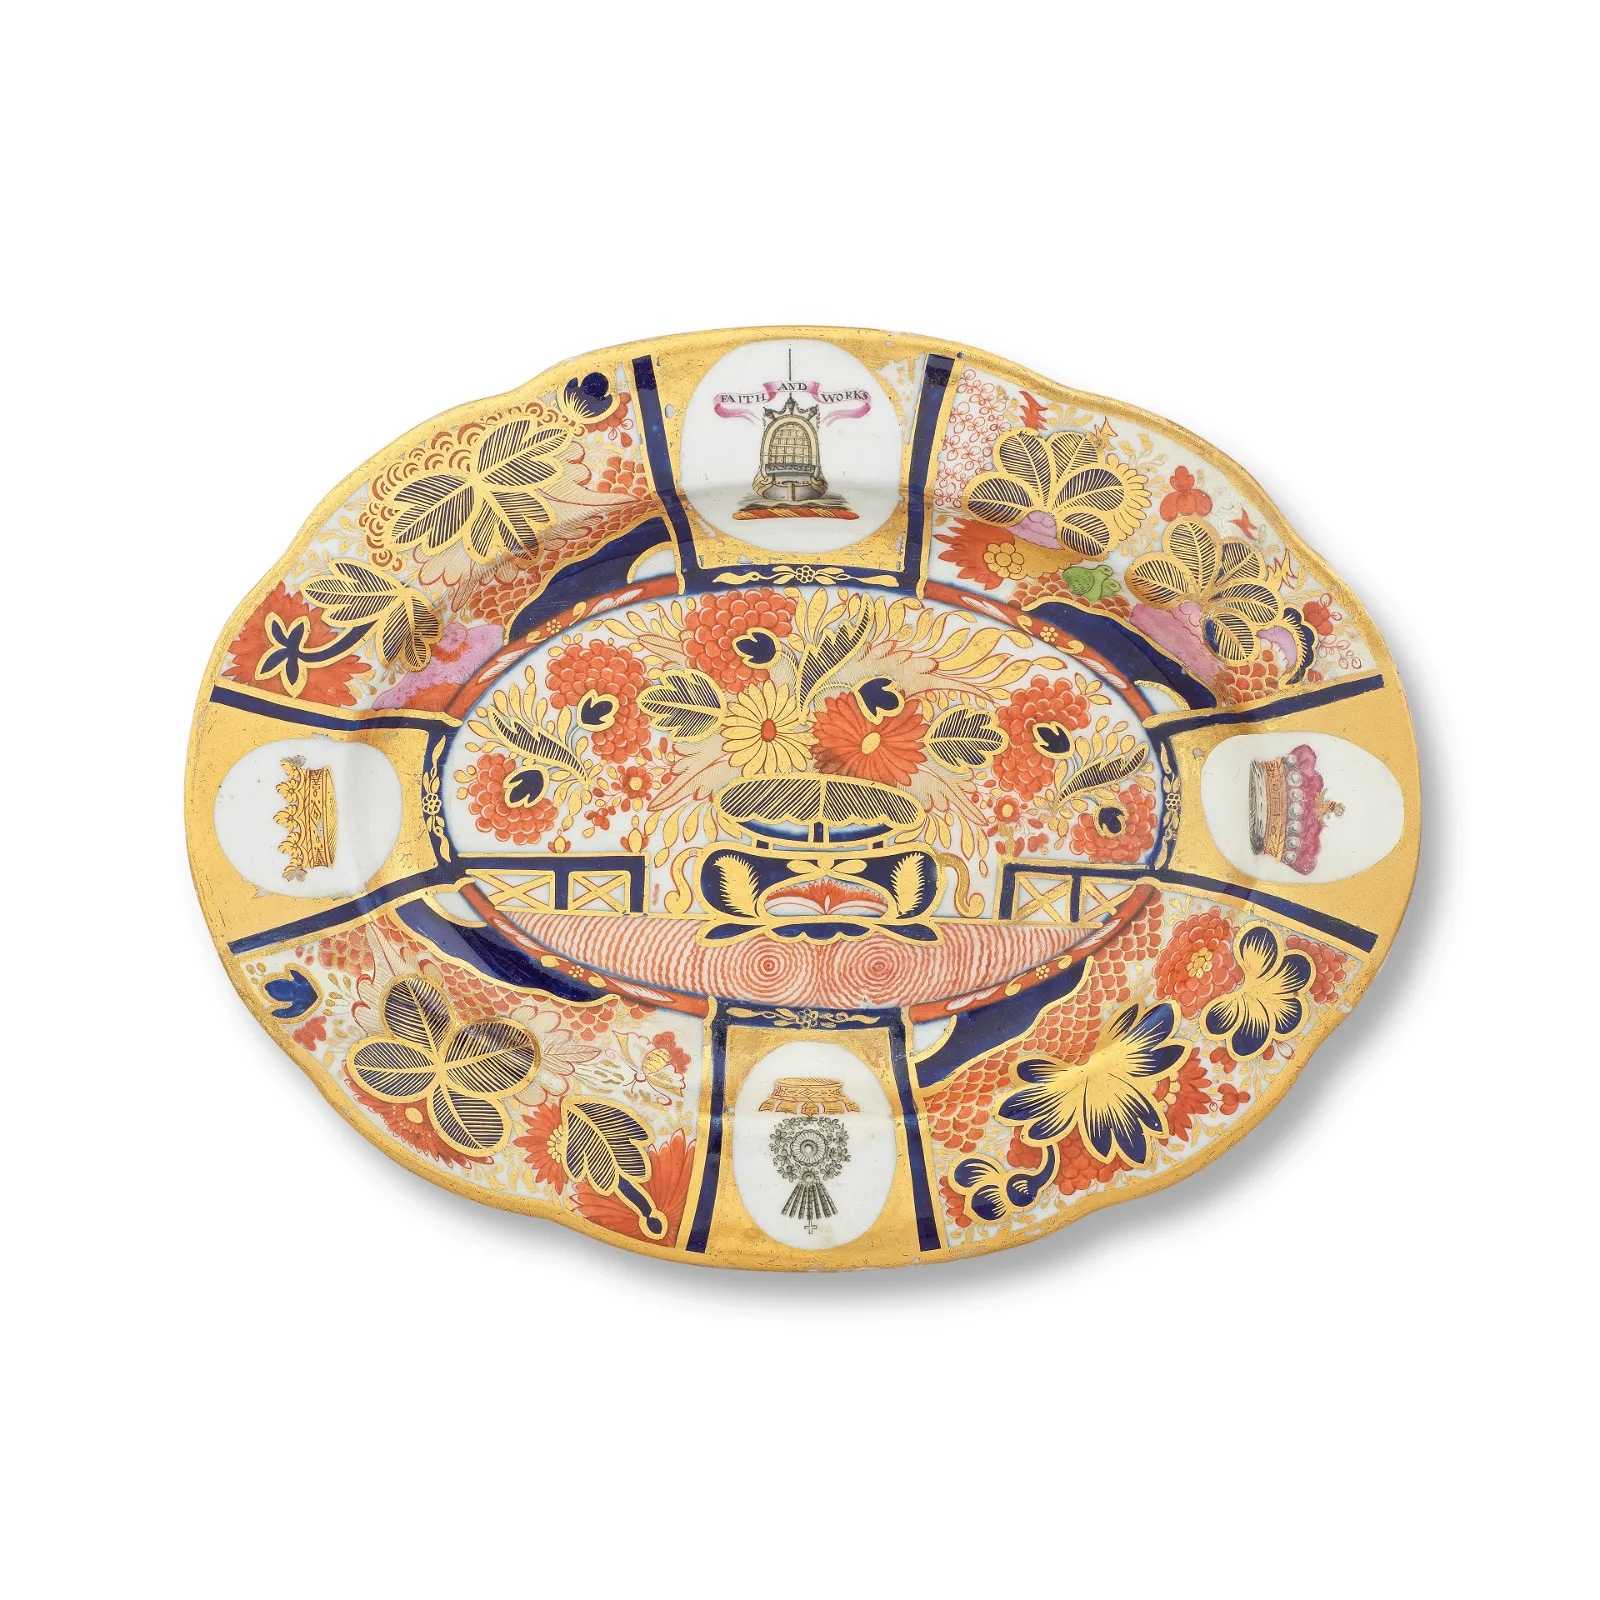 A Chamberlain Worcester small dish from the Horatia service, estimated at £600-£800 ($755-$1,005) at Bonhams.